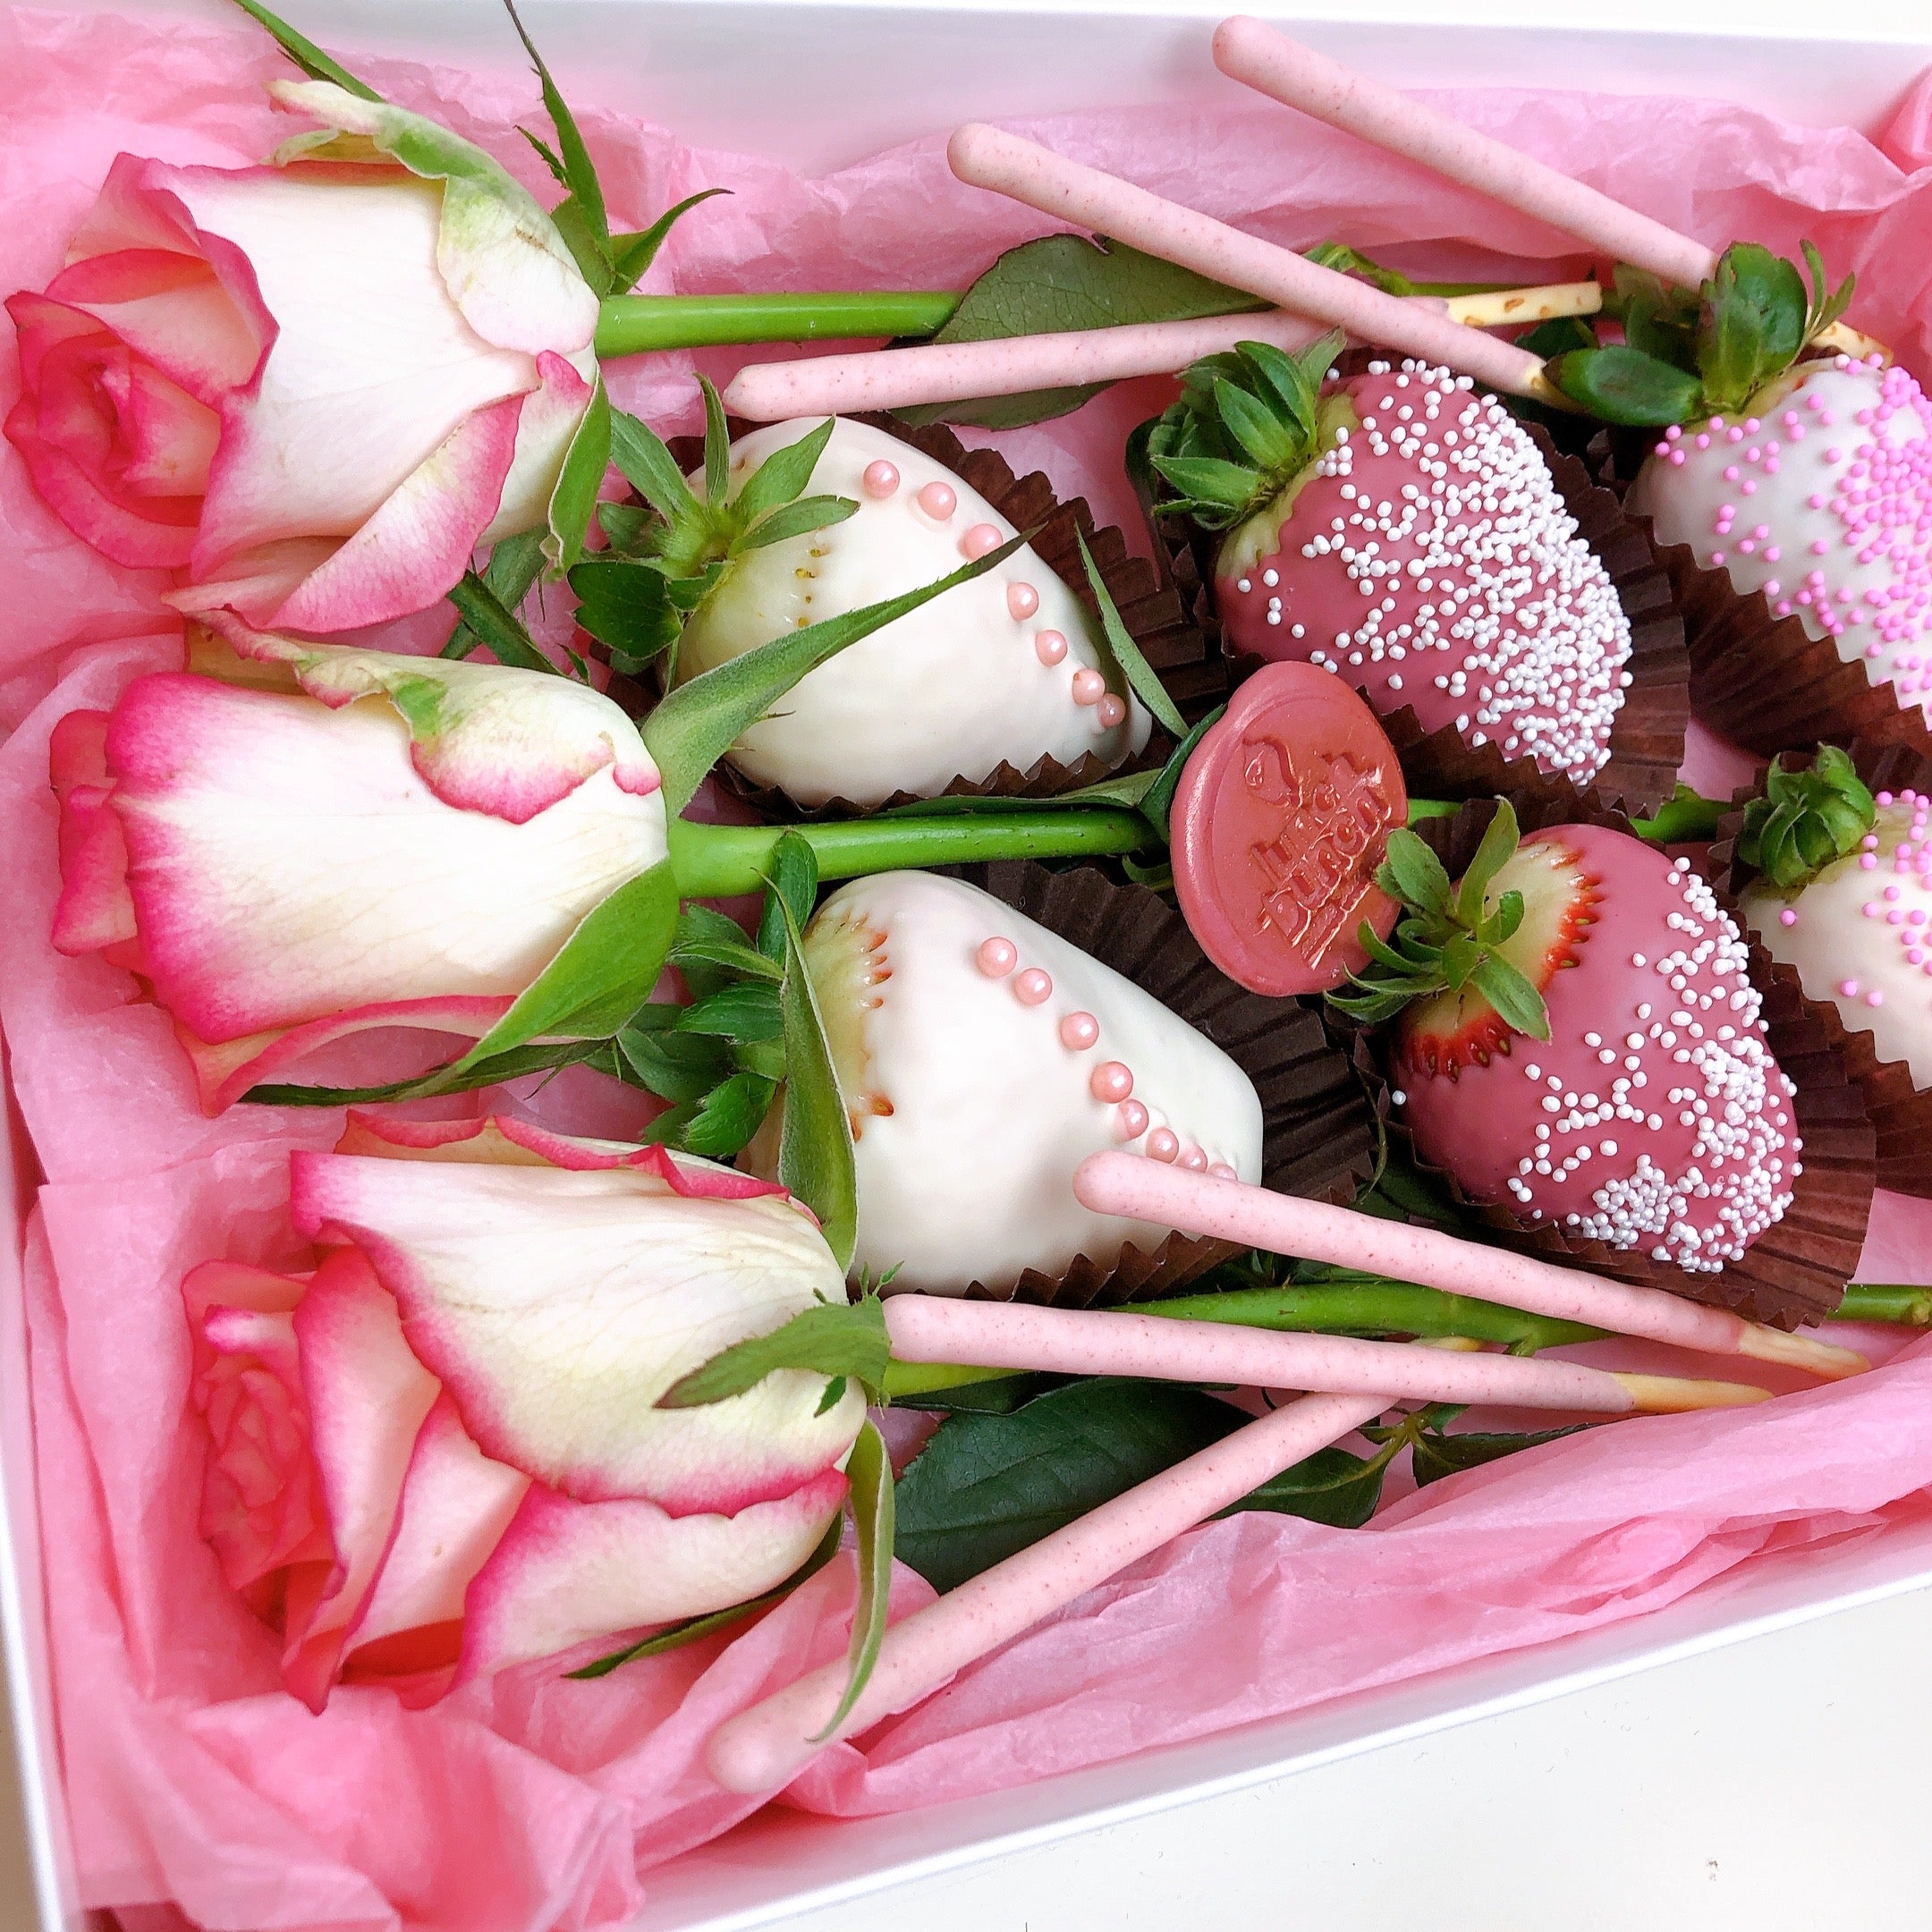 Chocolate covered strawberries and roses in a gift hamper available for same day delivery strawberry box